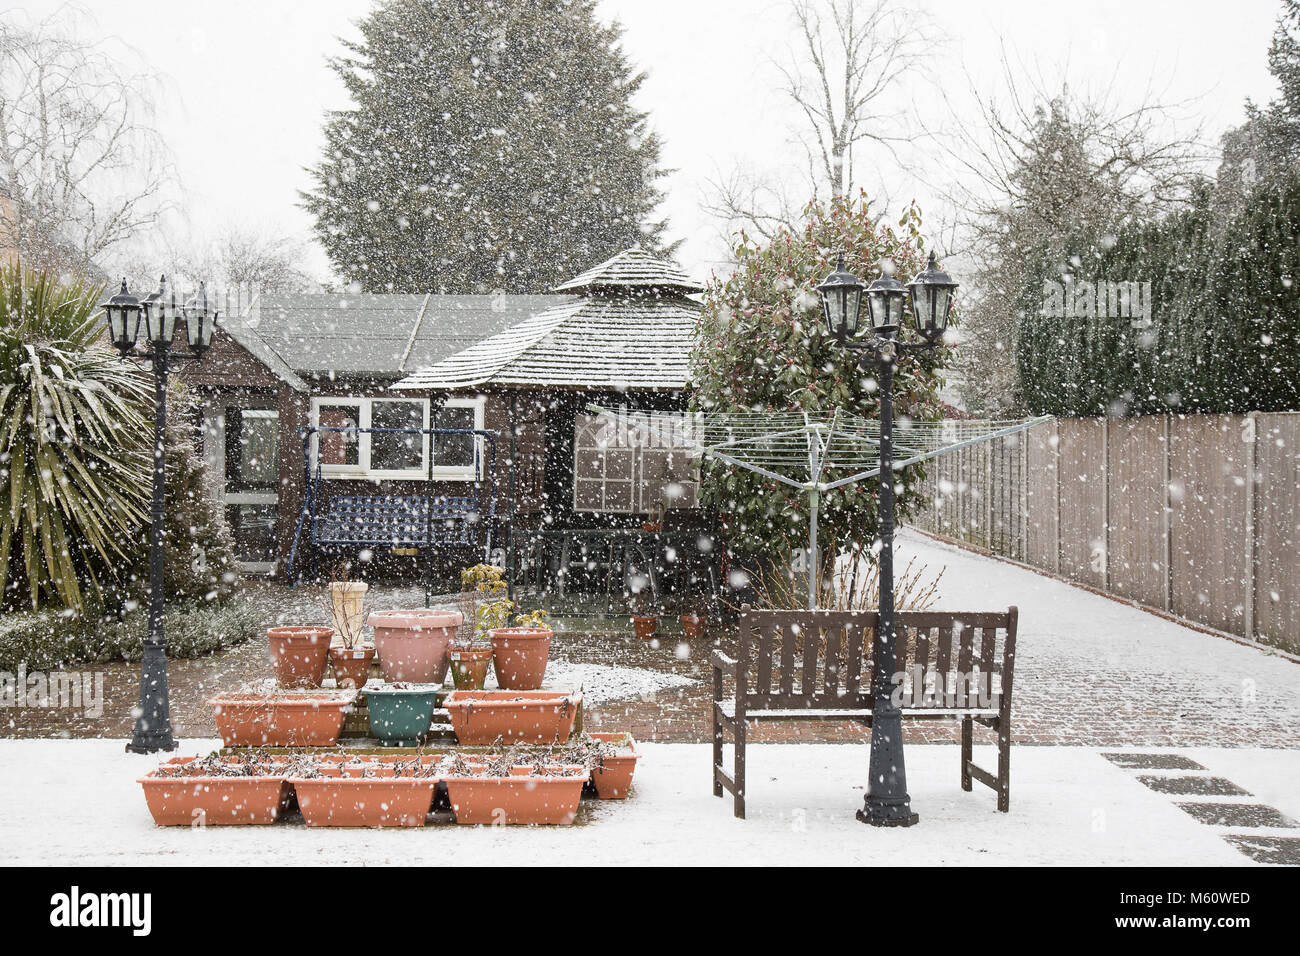 Kidderminster, UK. 27th Feb, 2018. UK weather: weird weather conditions as Worcestershire experiences on and off snow showers throughout the day. Falling snow is captured here in a Kidderminster garden. Credit: Lee Hudson/Alamy Live News Stock Photo